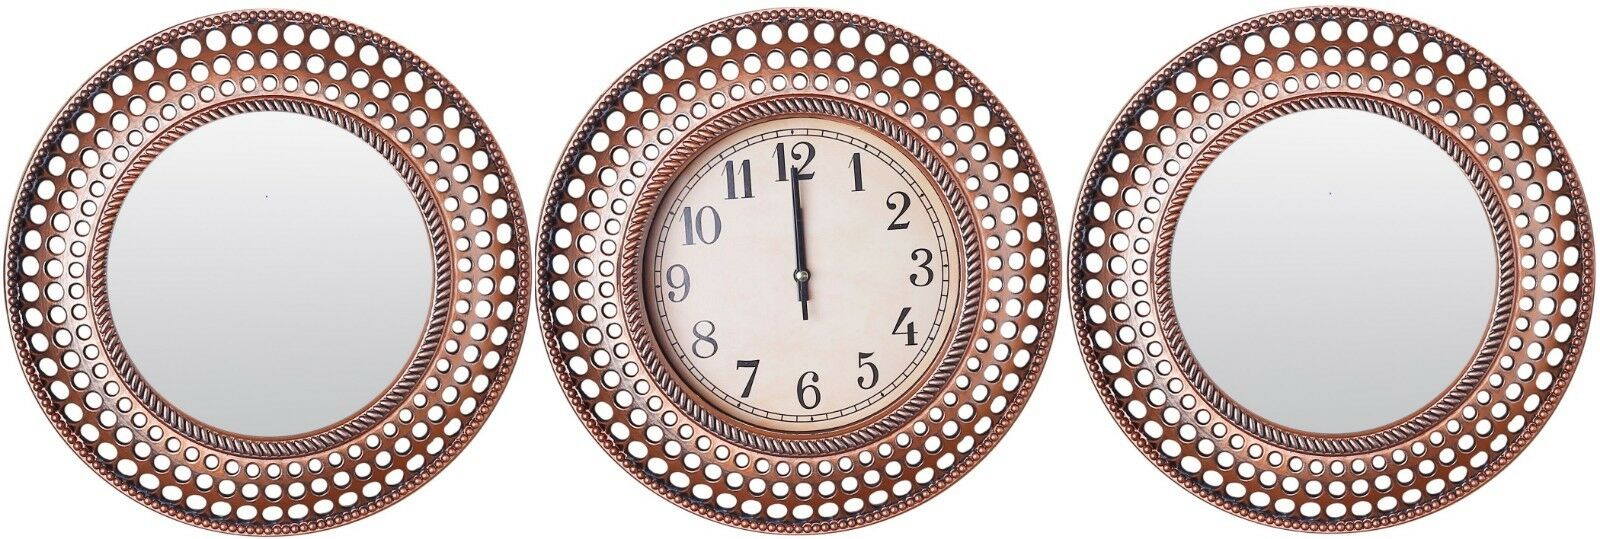 Set of 3 Brushed Copper Wall Clock & 2 Matching Mirror Wall Hanging Clock Mirror